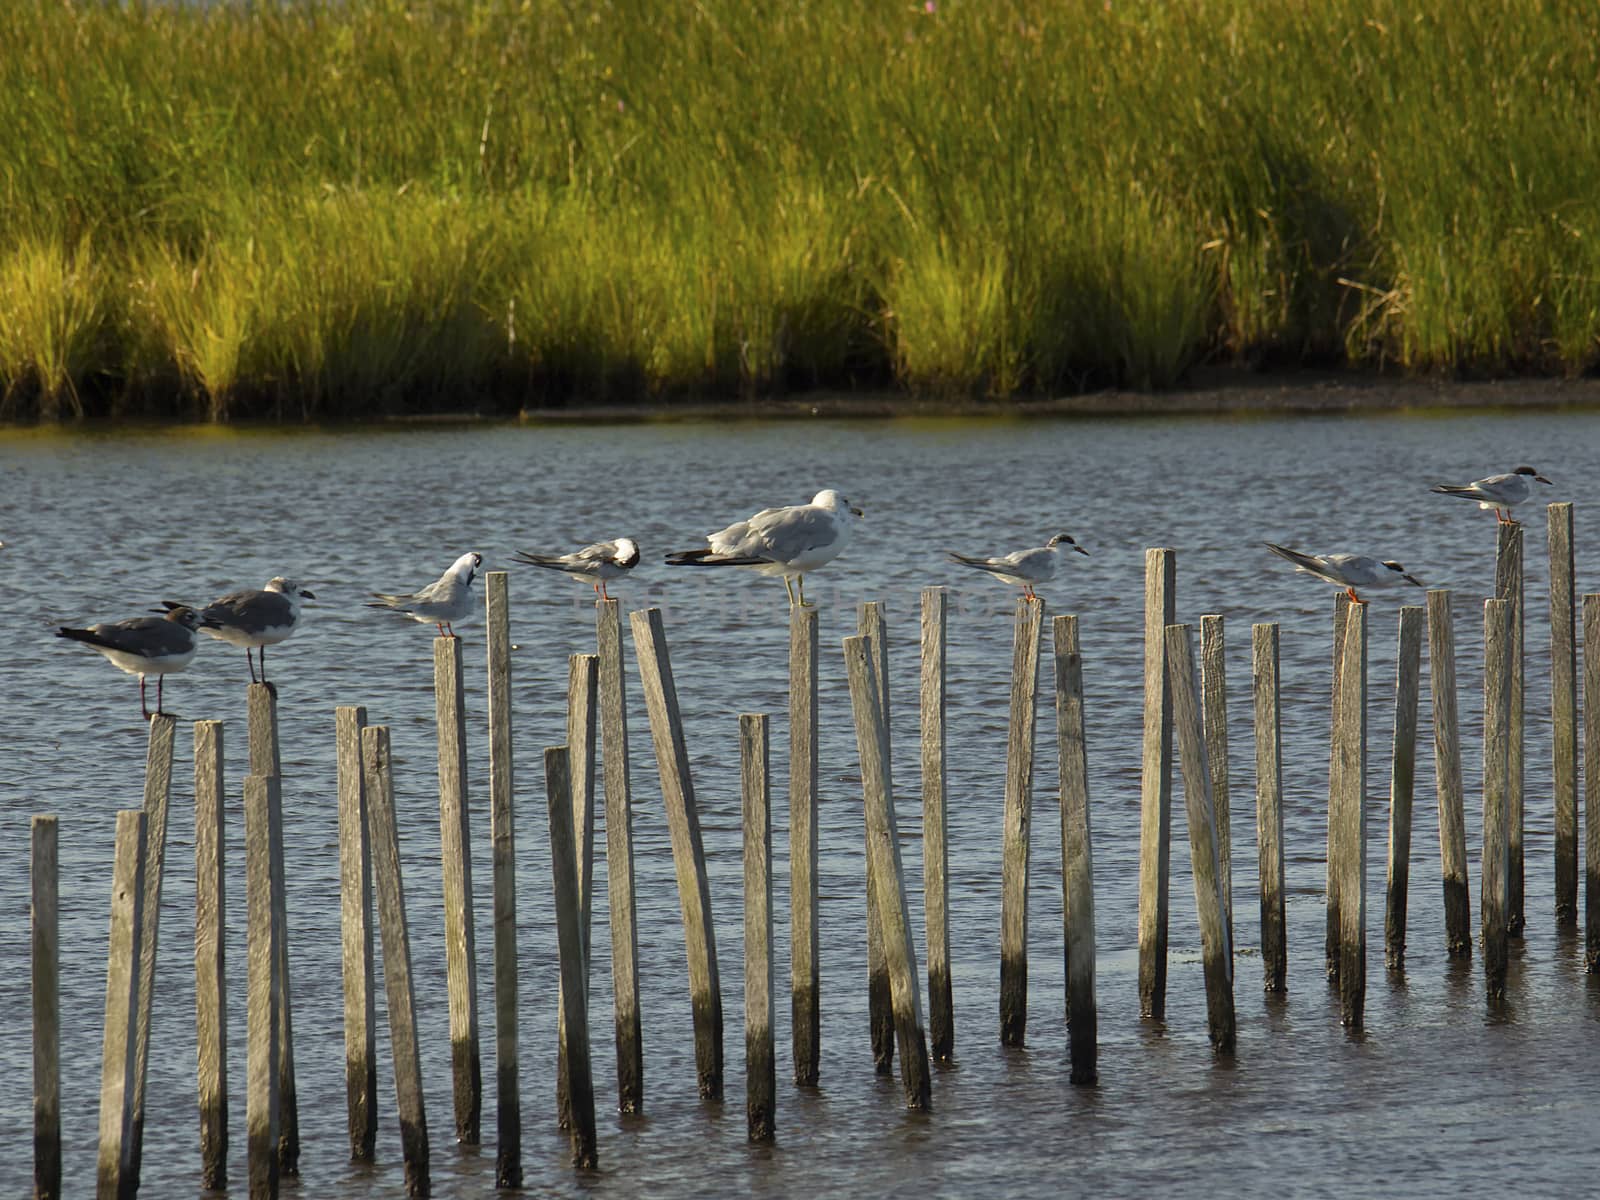 Group of seagulls standing on sticks by CharlieFloyd